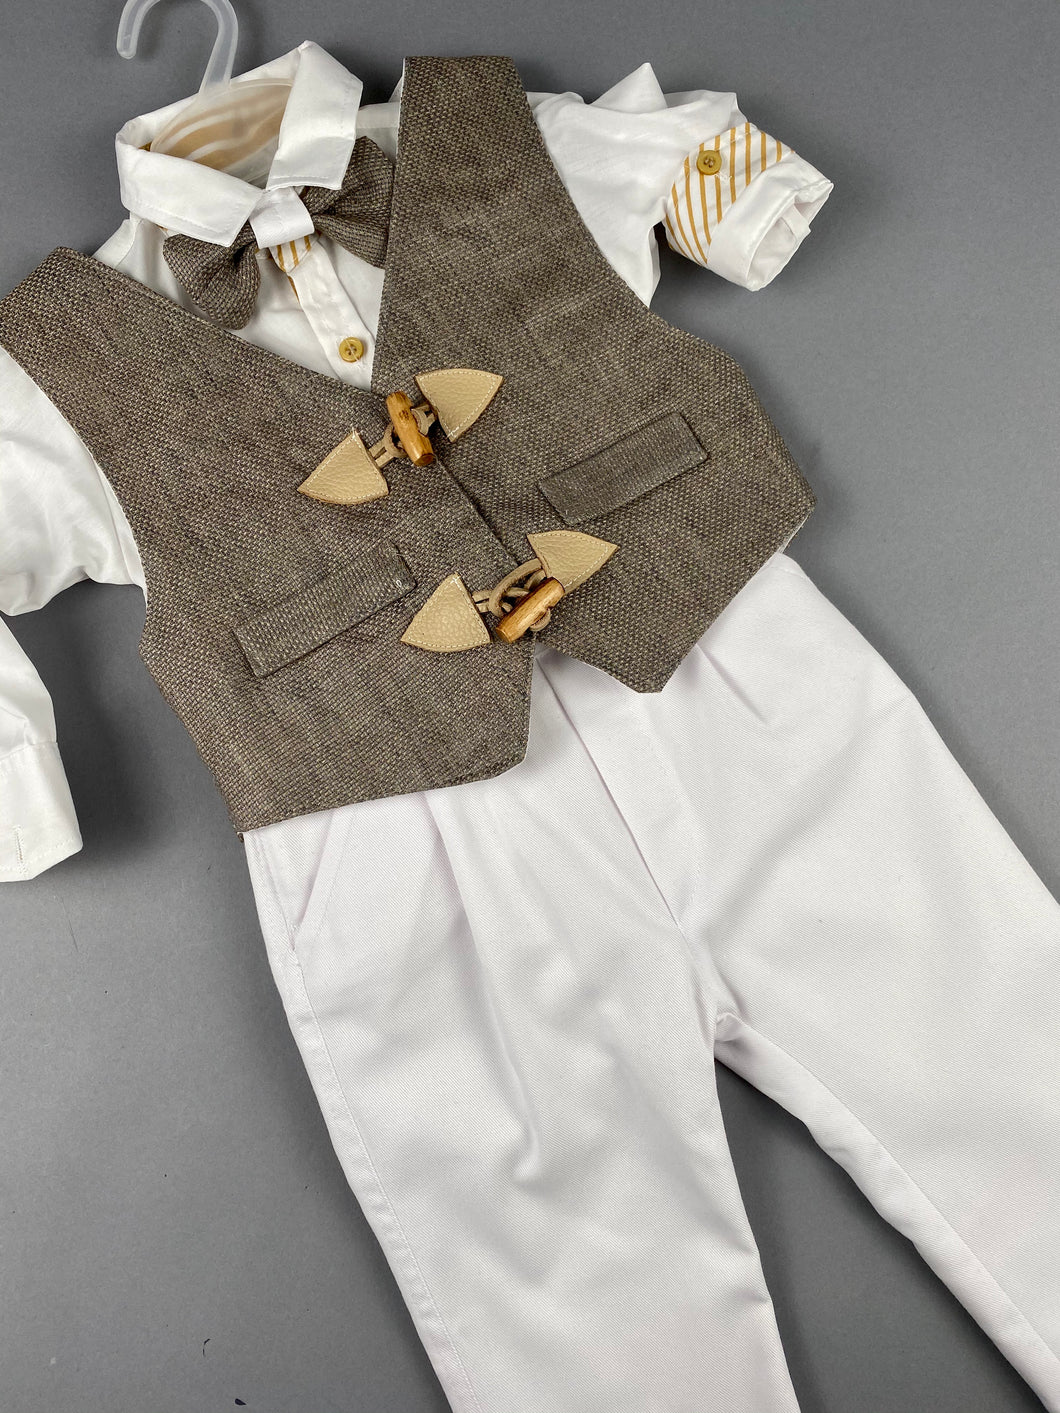 Rosies Collections 7pc full suit, Dress shirt trimmed  and cuff sleeves, Pants, Jacket with Matching Vest and wooden buttons, Belt or Suspenders, Cap. Made in Greece exclusively for Rosies Collections S20192